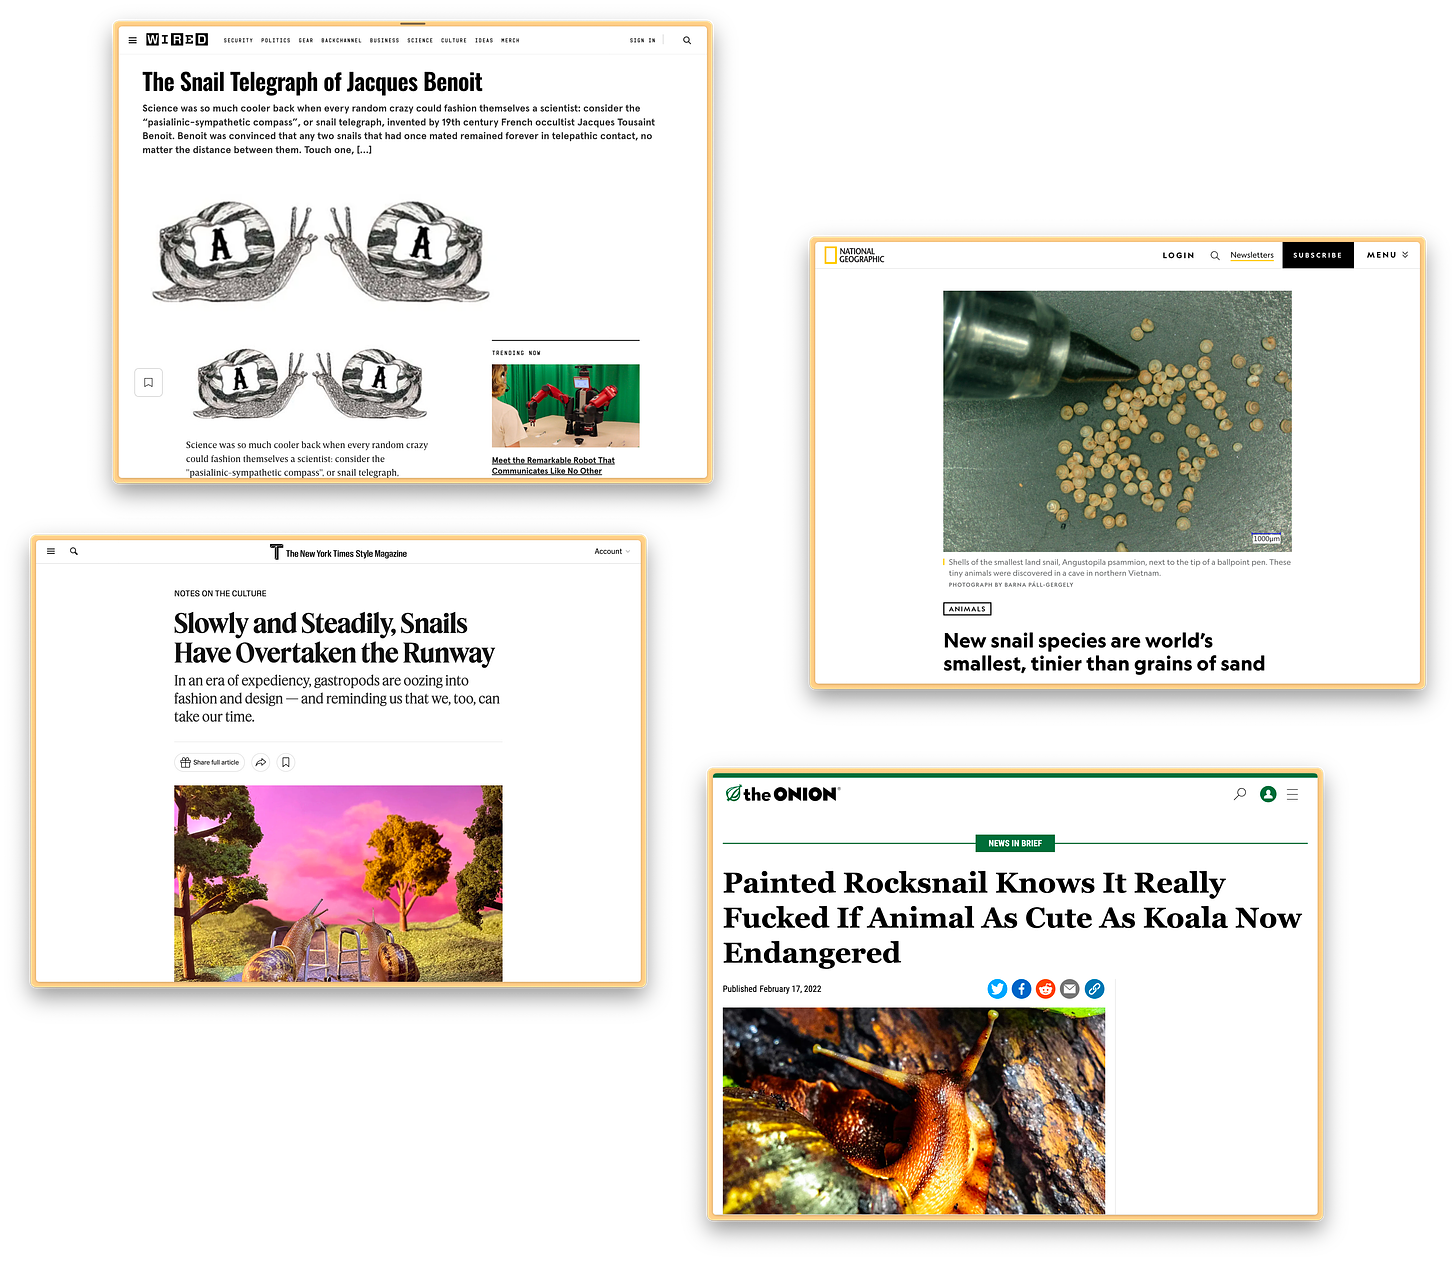 four screenshots of snail-themed stories on various news organizations' websites. they are all pretty similar in design: image, then headline, or headline, then image